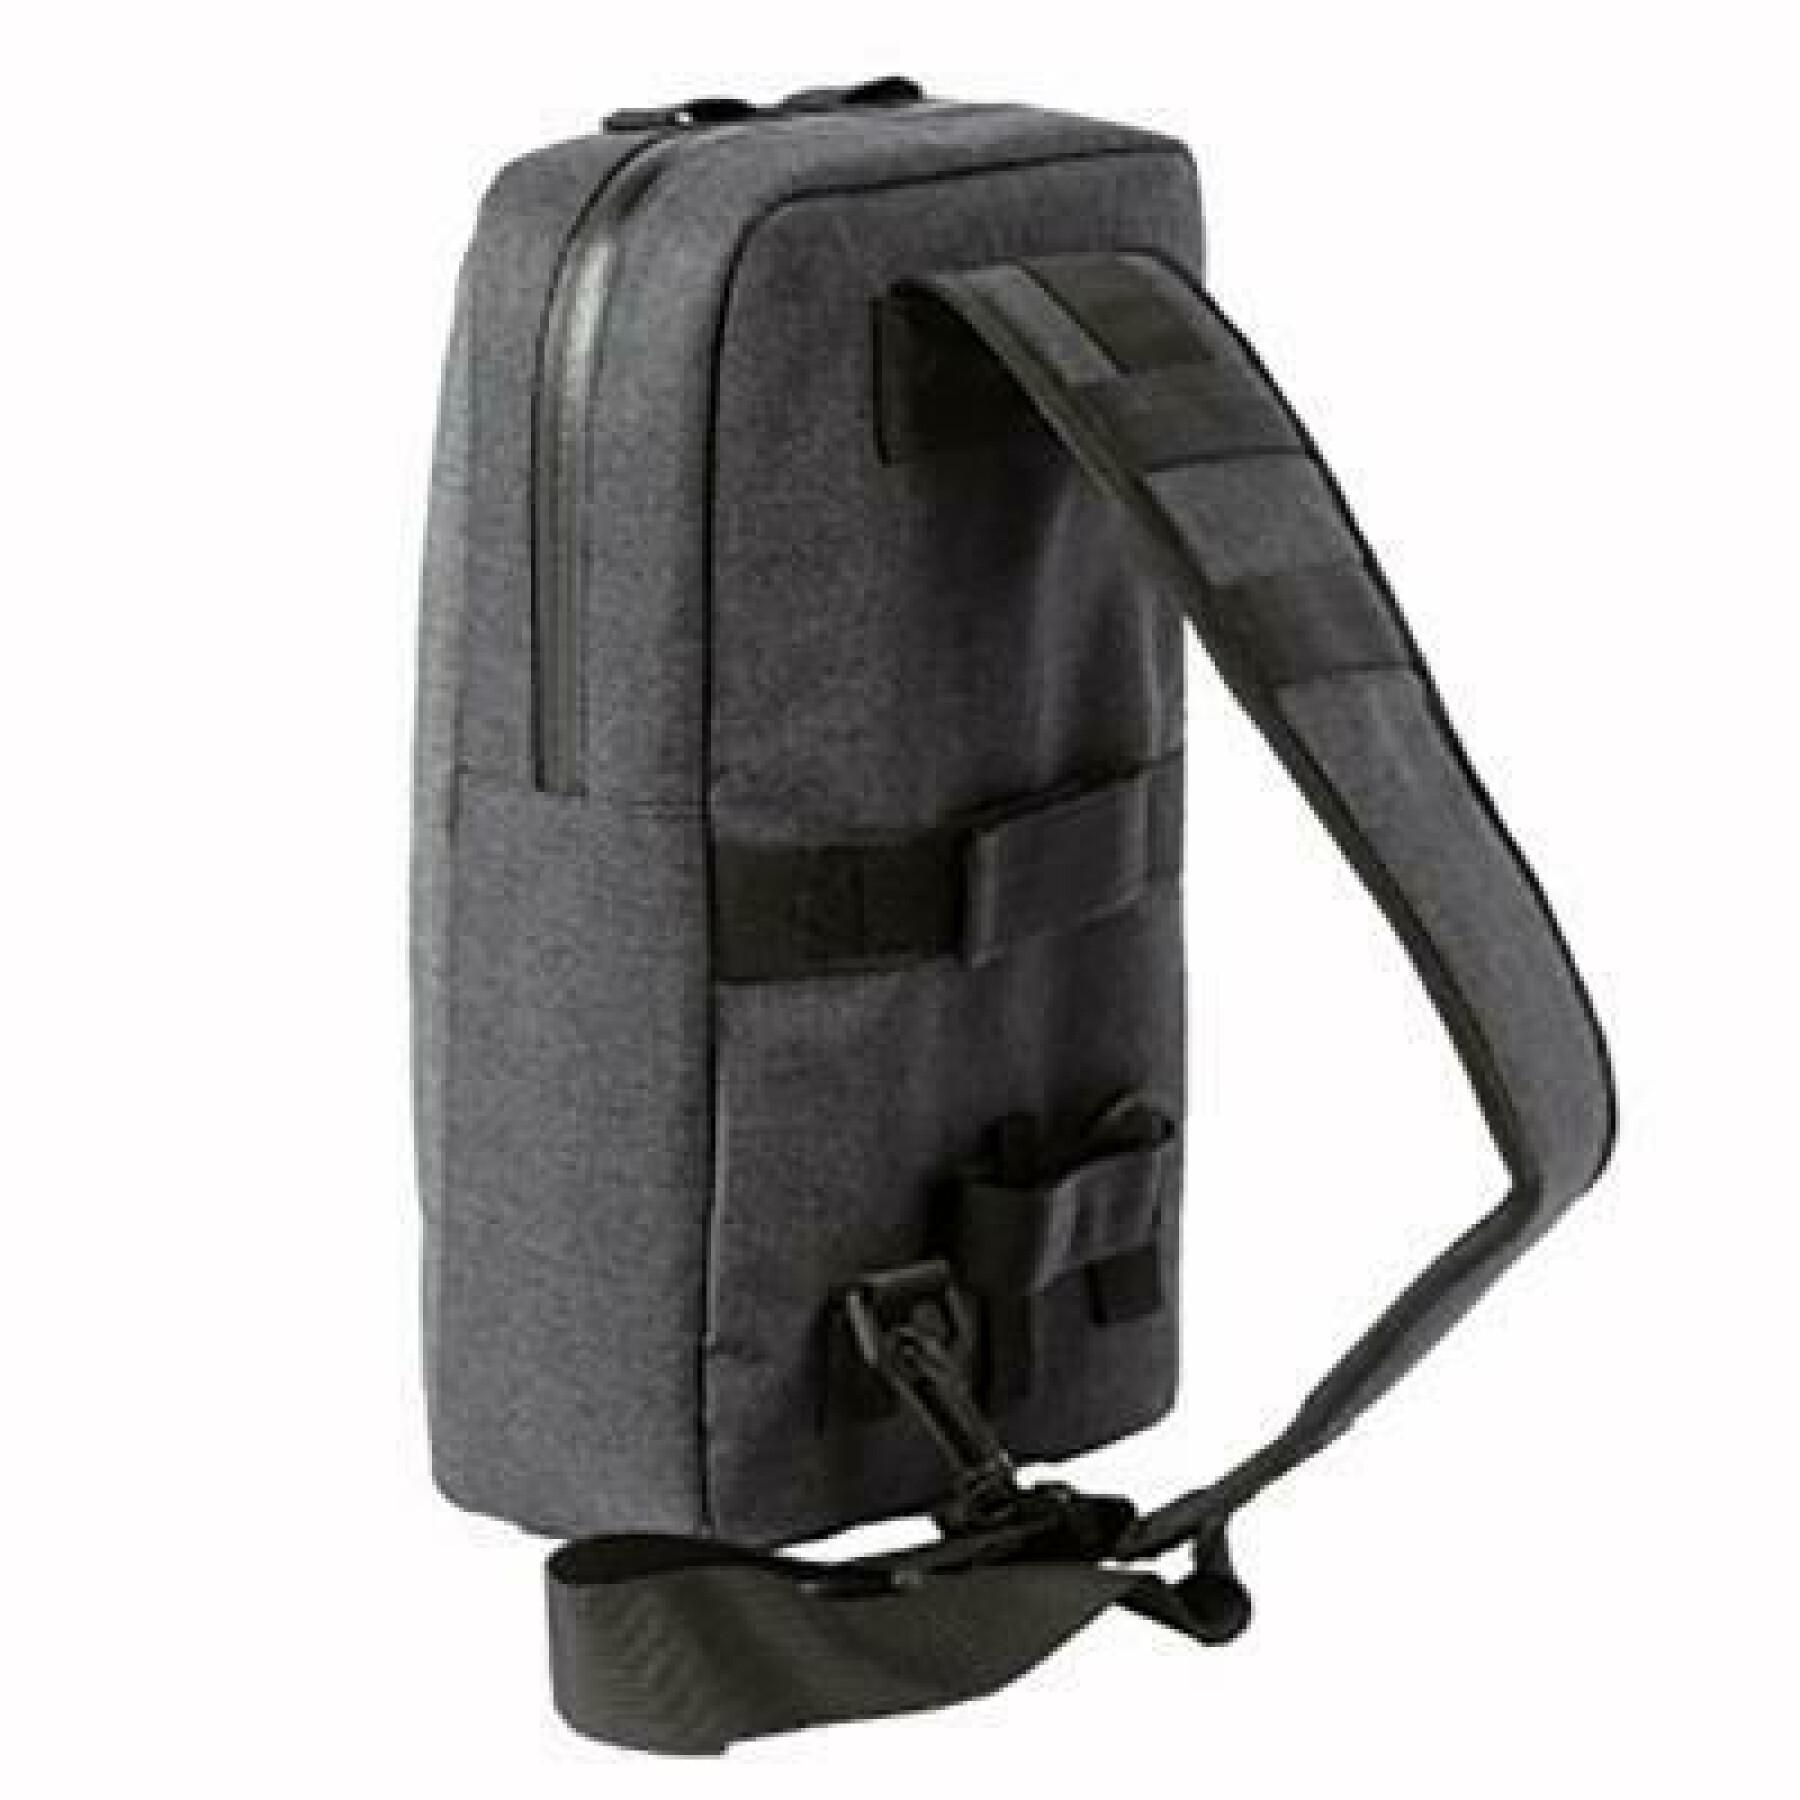 Waterproof and universal scooter bag Wantalis trotcase deluxe (20,5x33x8)